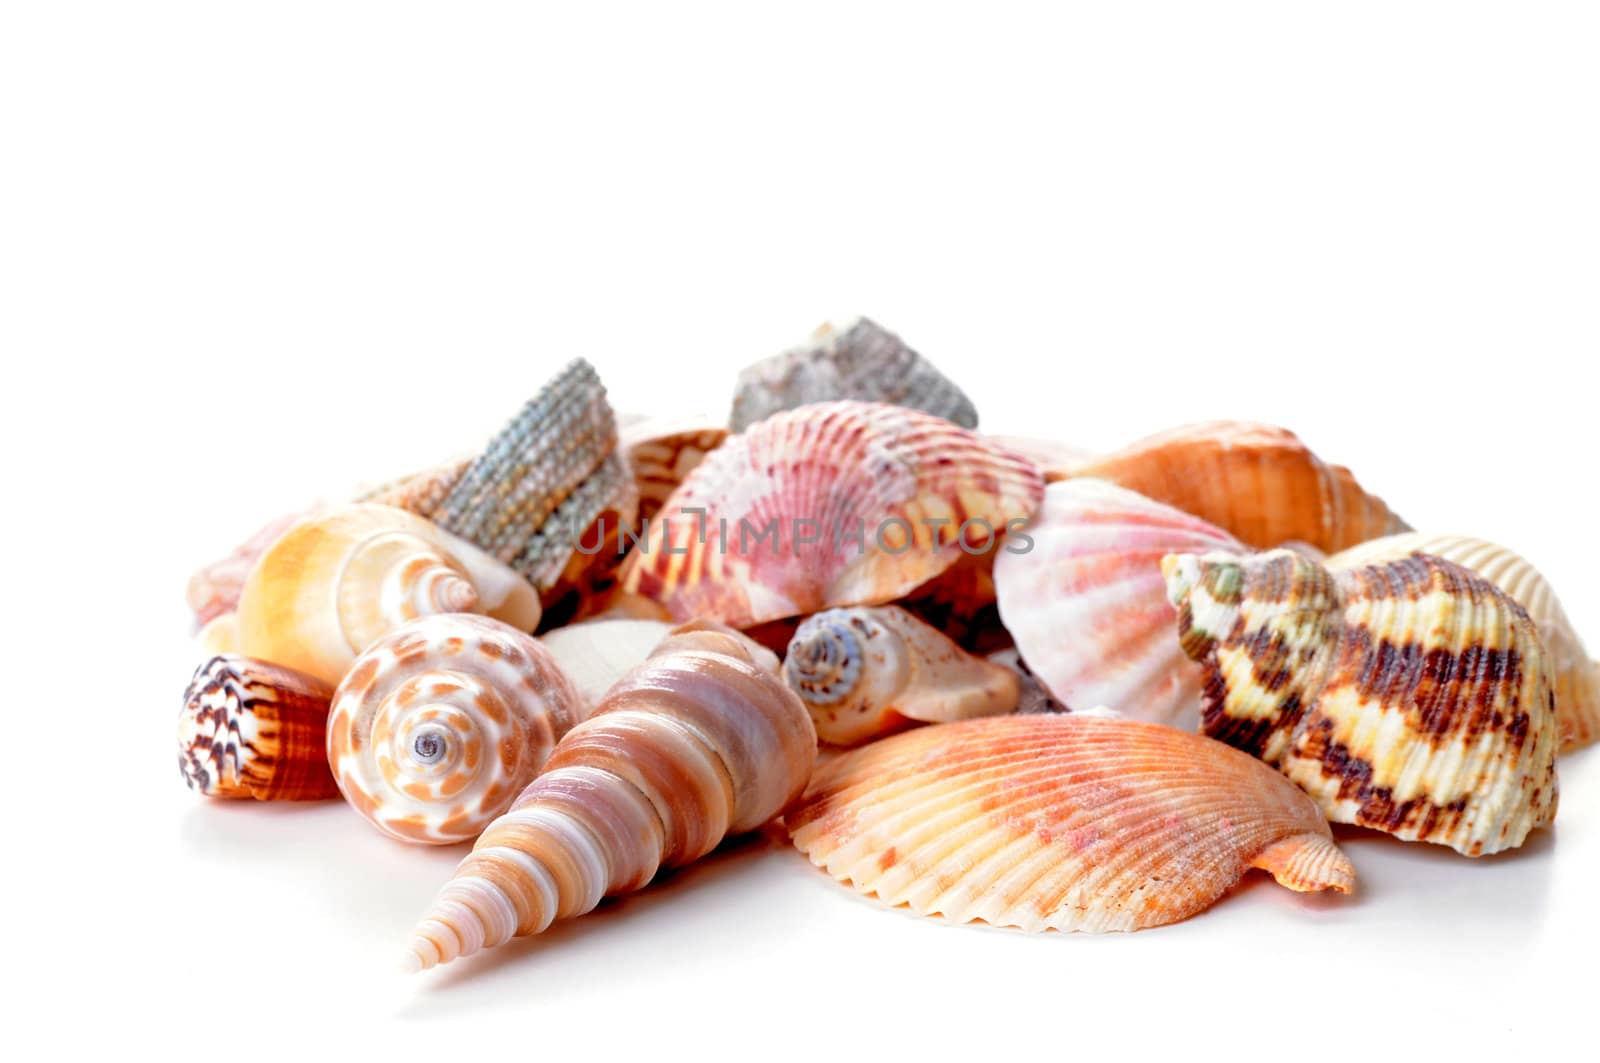 Shells by billberryphotography